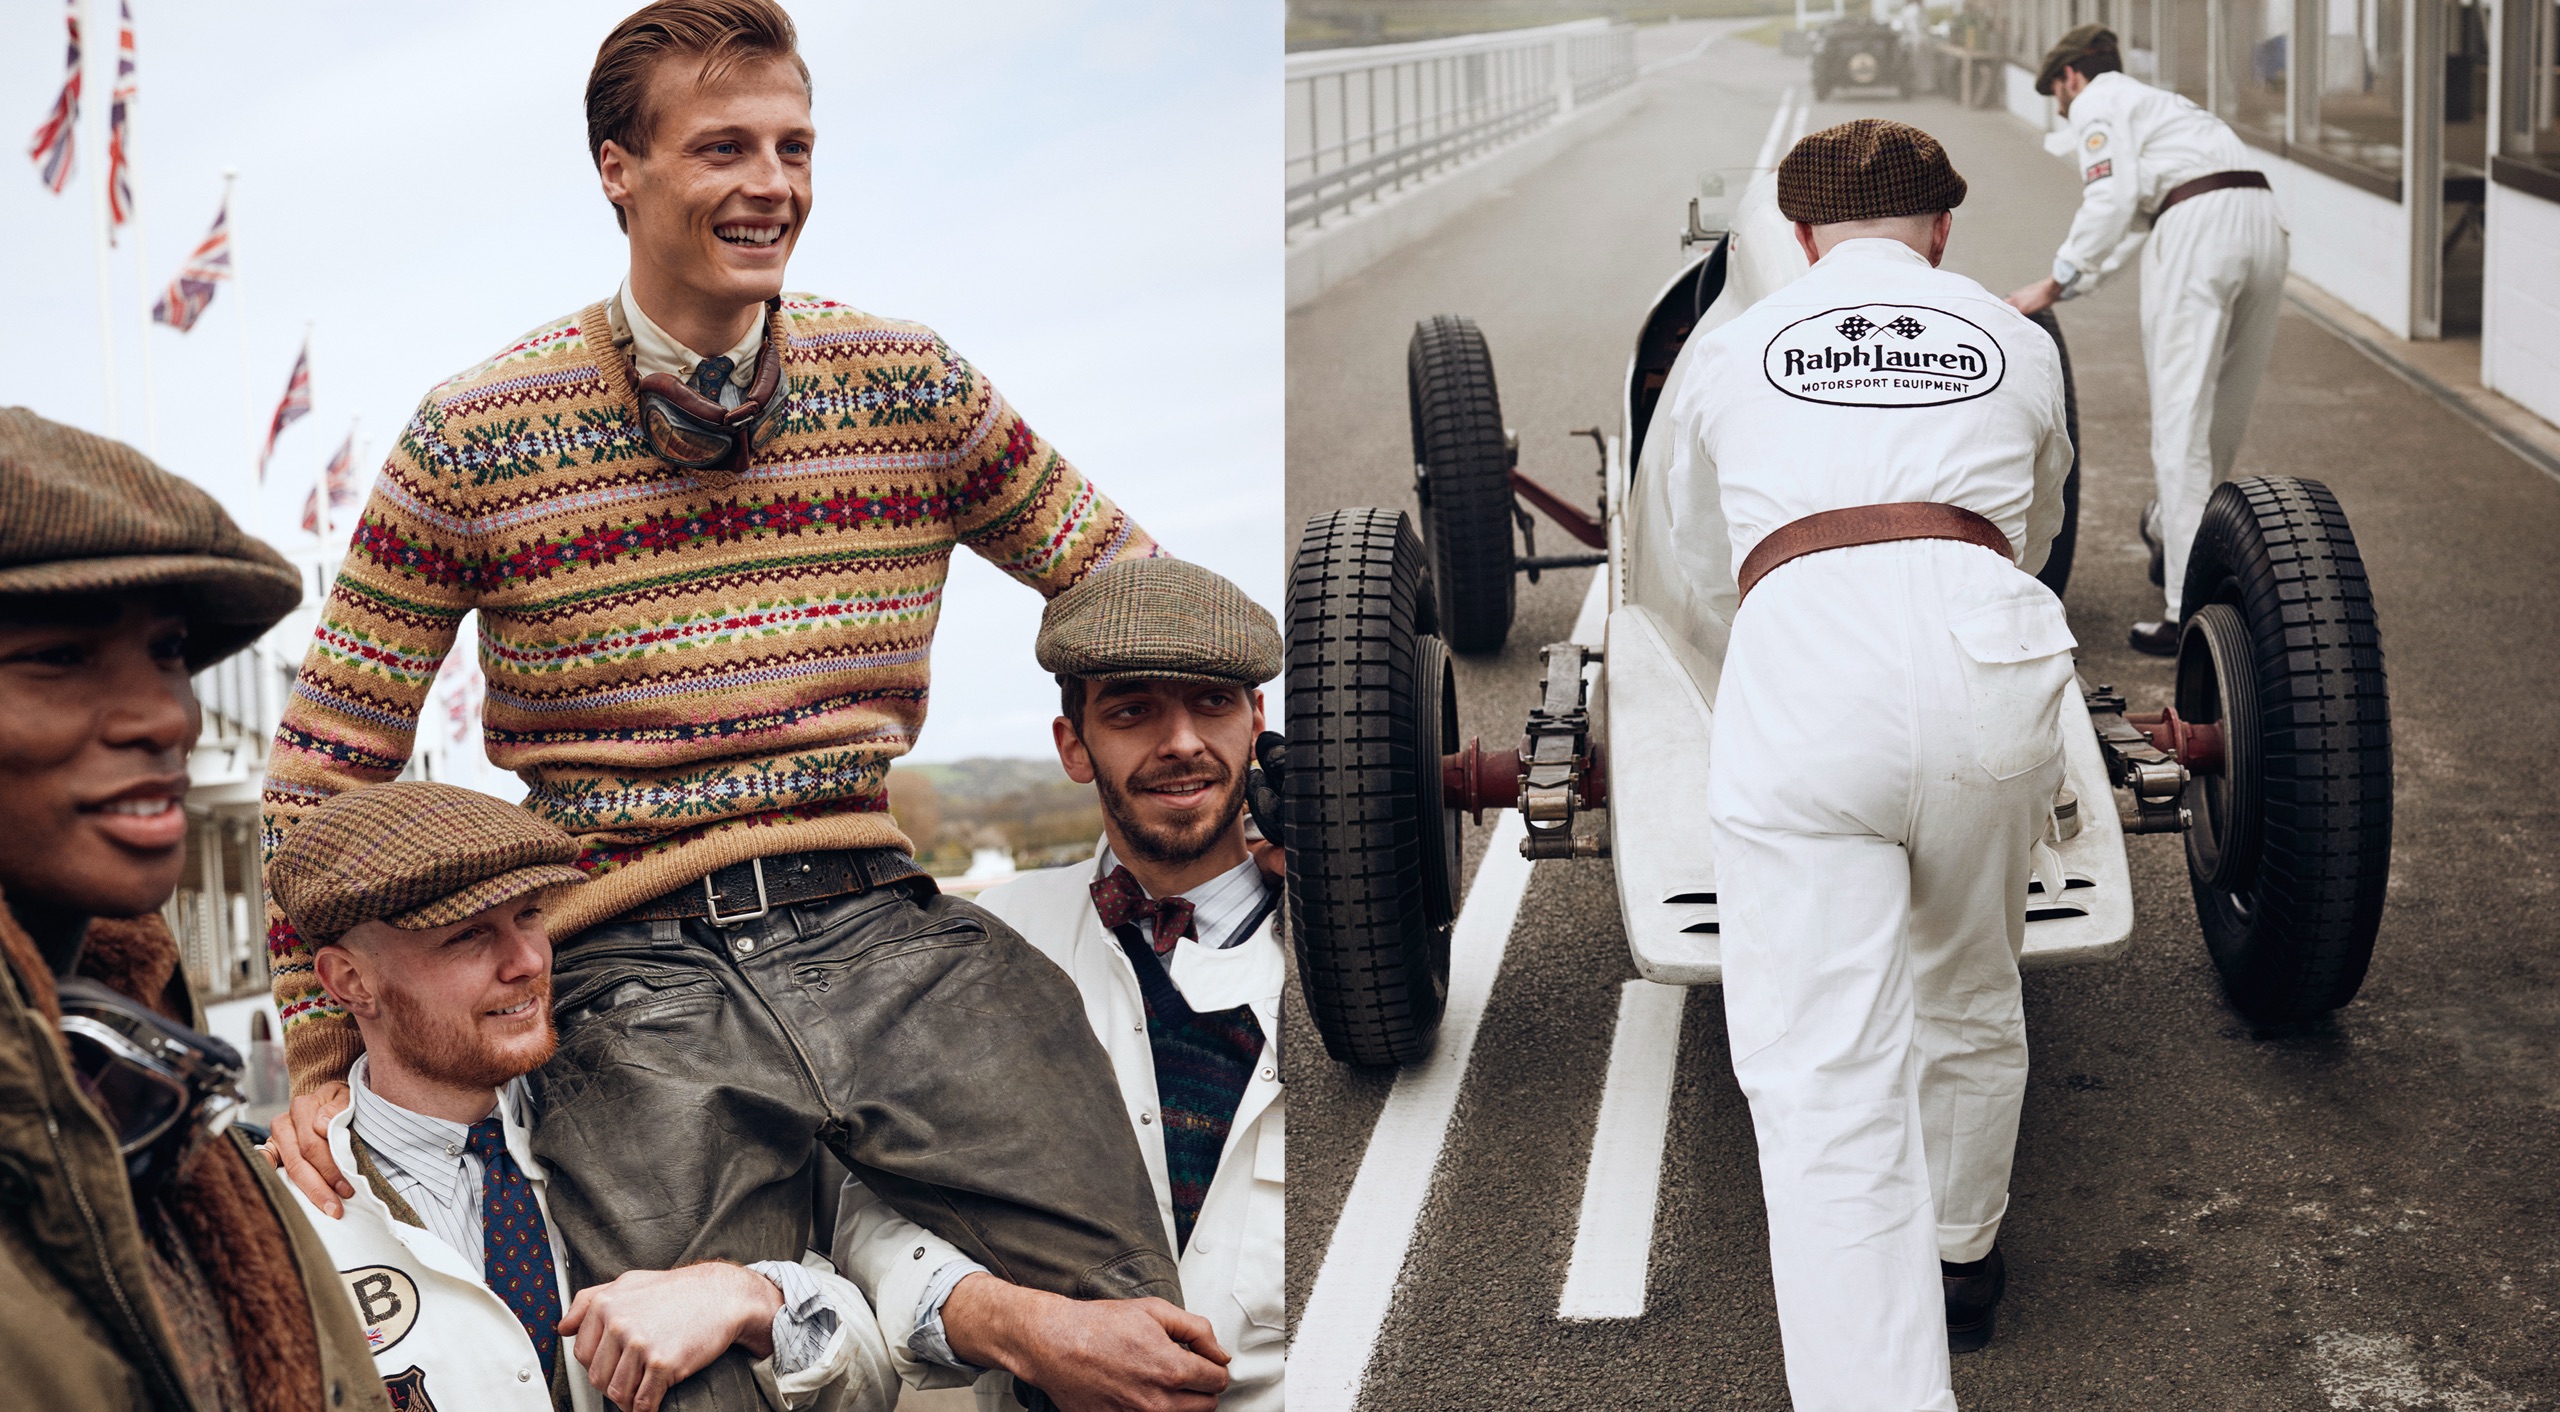 <strong>ON LOCATION</strong><br/><span>This season of Polo Originals, inspired by the golden era of Grand Prix car racing, was photographed at the Goodwood Motor Circuit, which is located in West Sussex, on the 12,000-acre Goodwood Estate. The Circuit has since become known for hosting a number of prestigious motorsport events, including the famous Festival of Speed and Revival.</span> <br/><rlmag_link href="https://www.ralphlauren.global/et/en/search?cgid=brands-prl-tough-and-refined-cg"><button class="shop-collection">Shop the Story</button></rlmag_link>